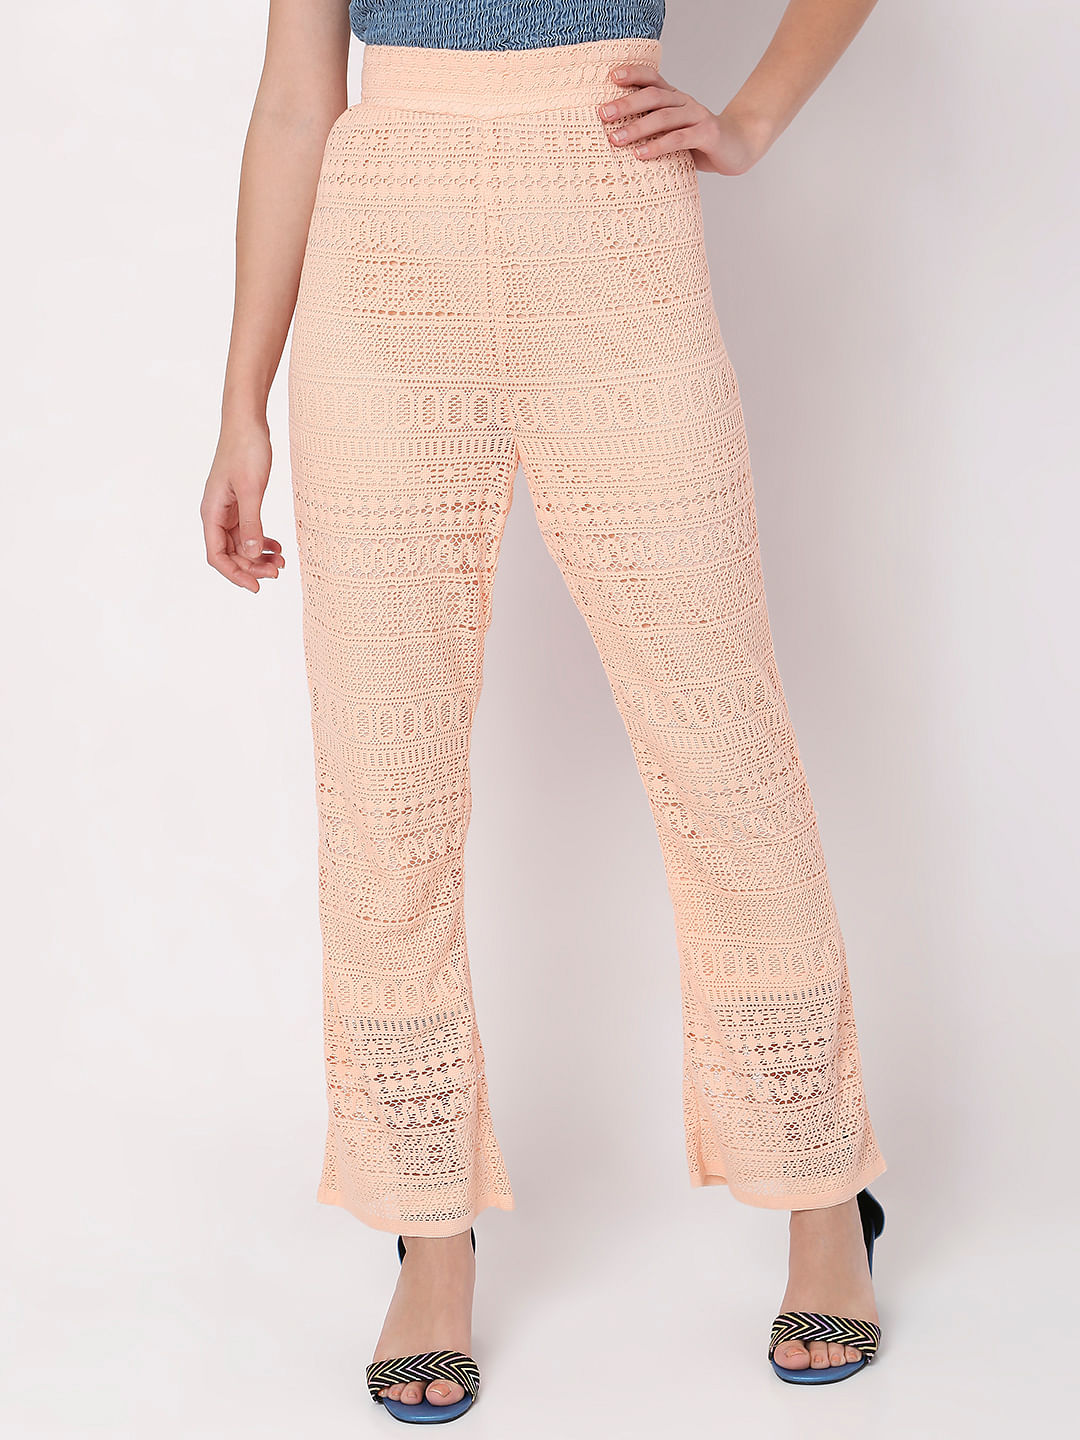 Buy White Lace Cotton Pants | ROZNAZN003/ROZ4 | The loom